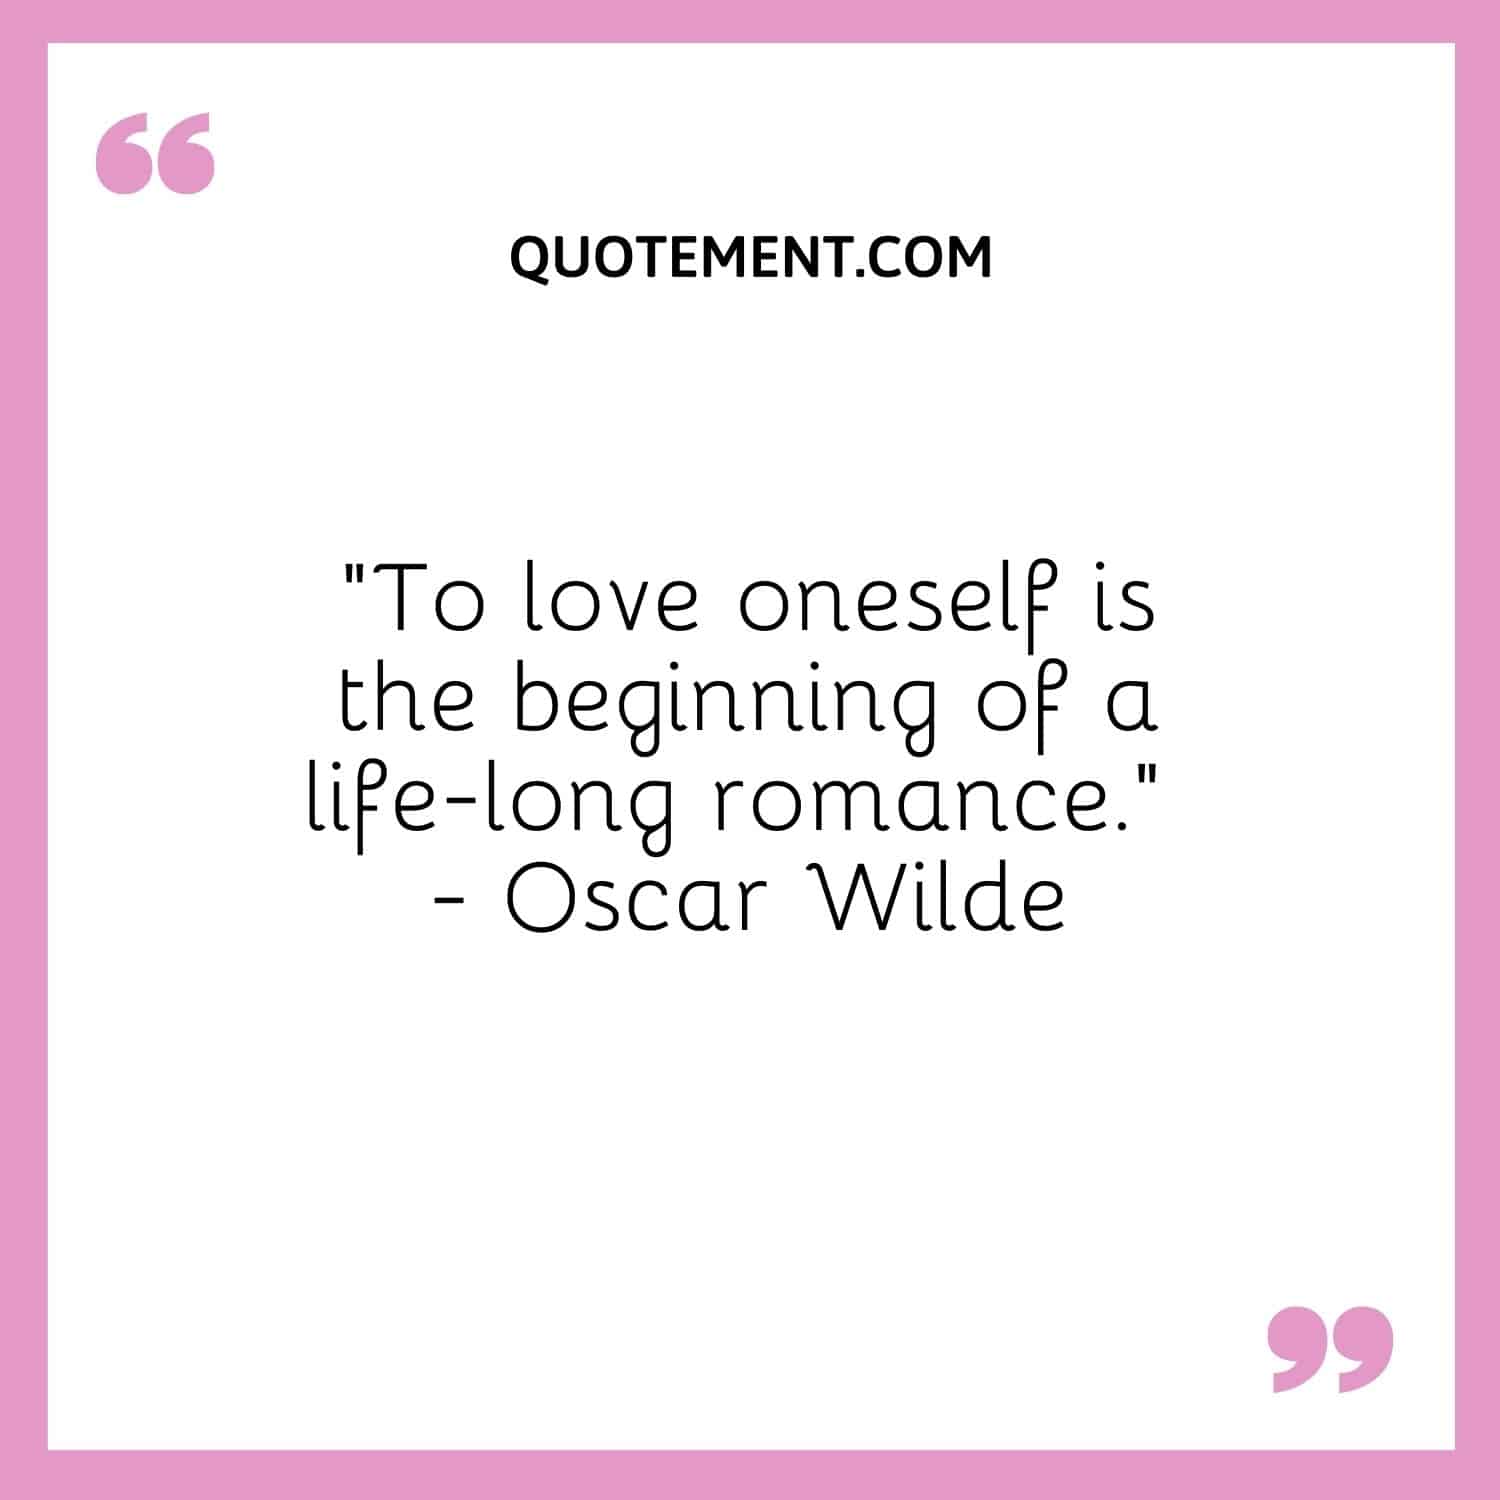 To love oneself is the beginning of a life-long romance